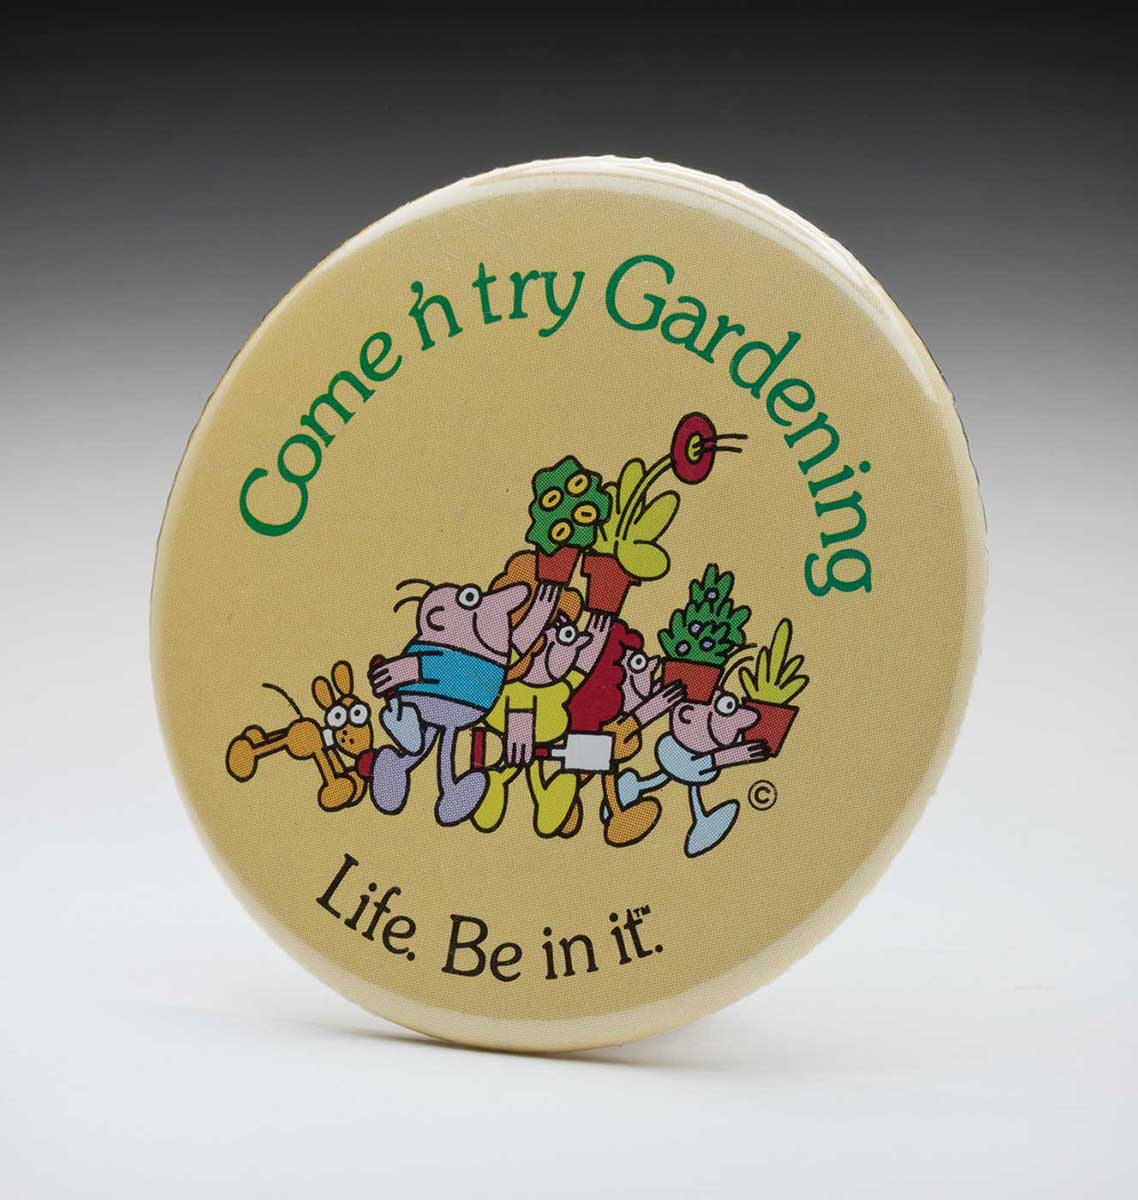 Life. Be in it. badge with text 'Come ’n try Gardening'. - click to view larger image